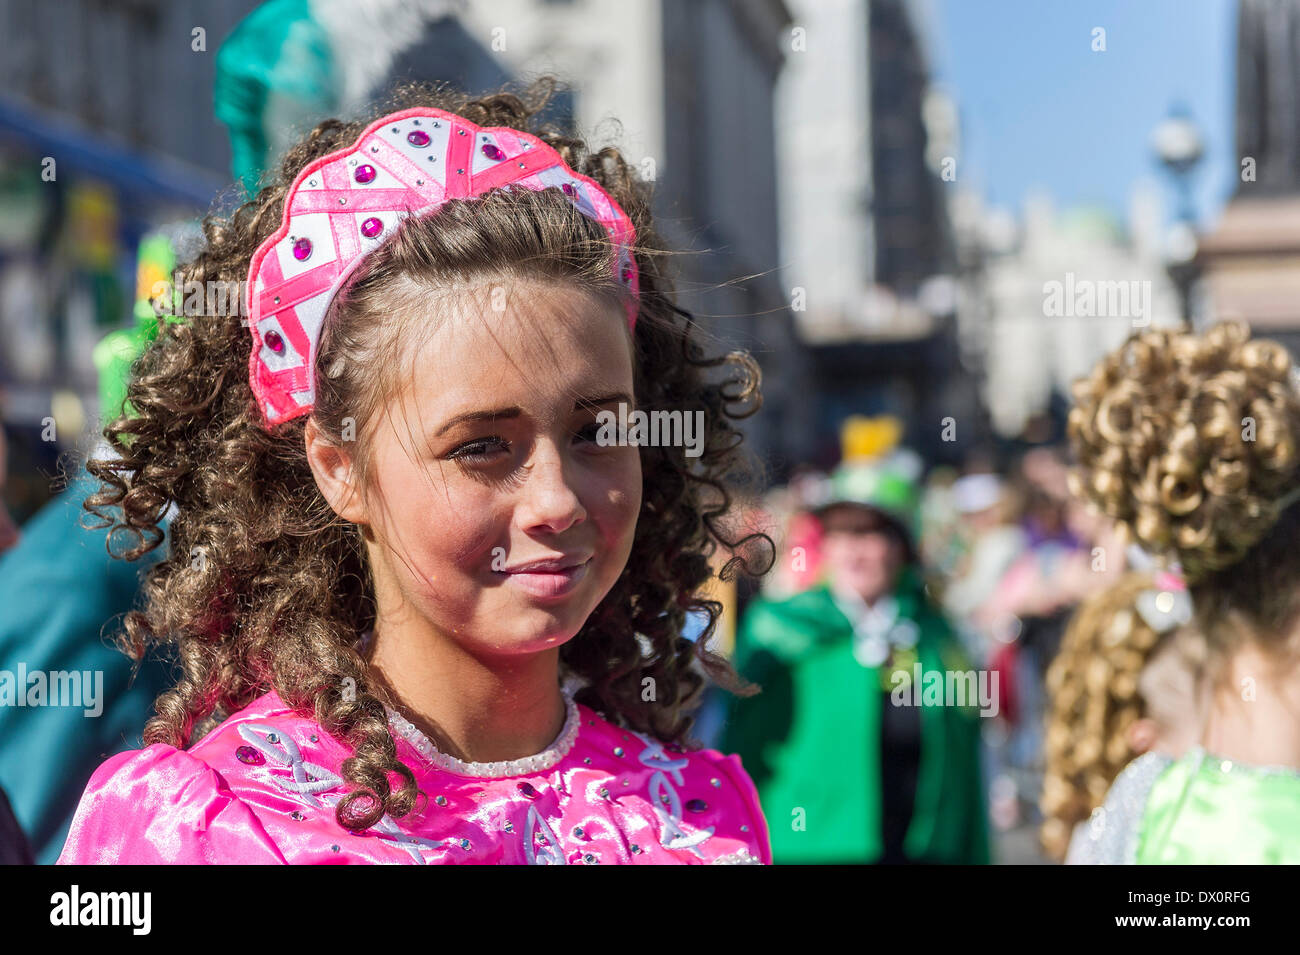 London, UK. 16 March 2014. A young Irish dancer during the annual St Patrick's day parade in London.  Photographer:  Gordon Scammell/Alamy Live News Stock Photo